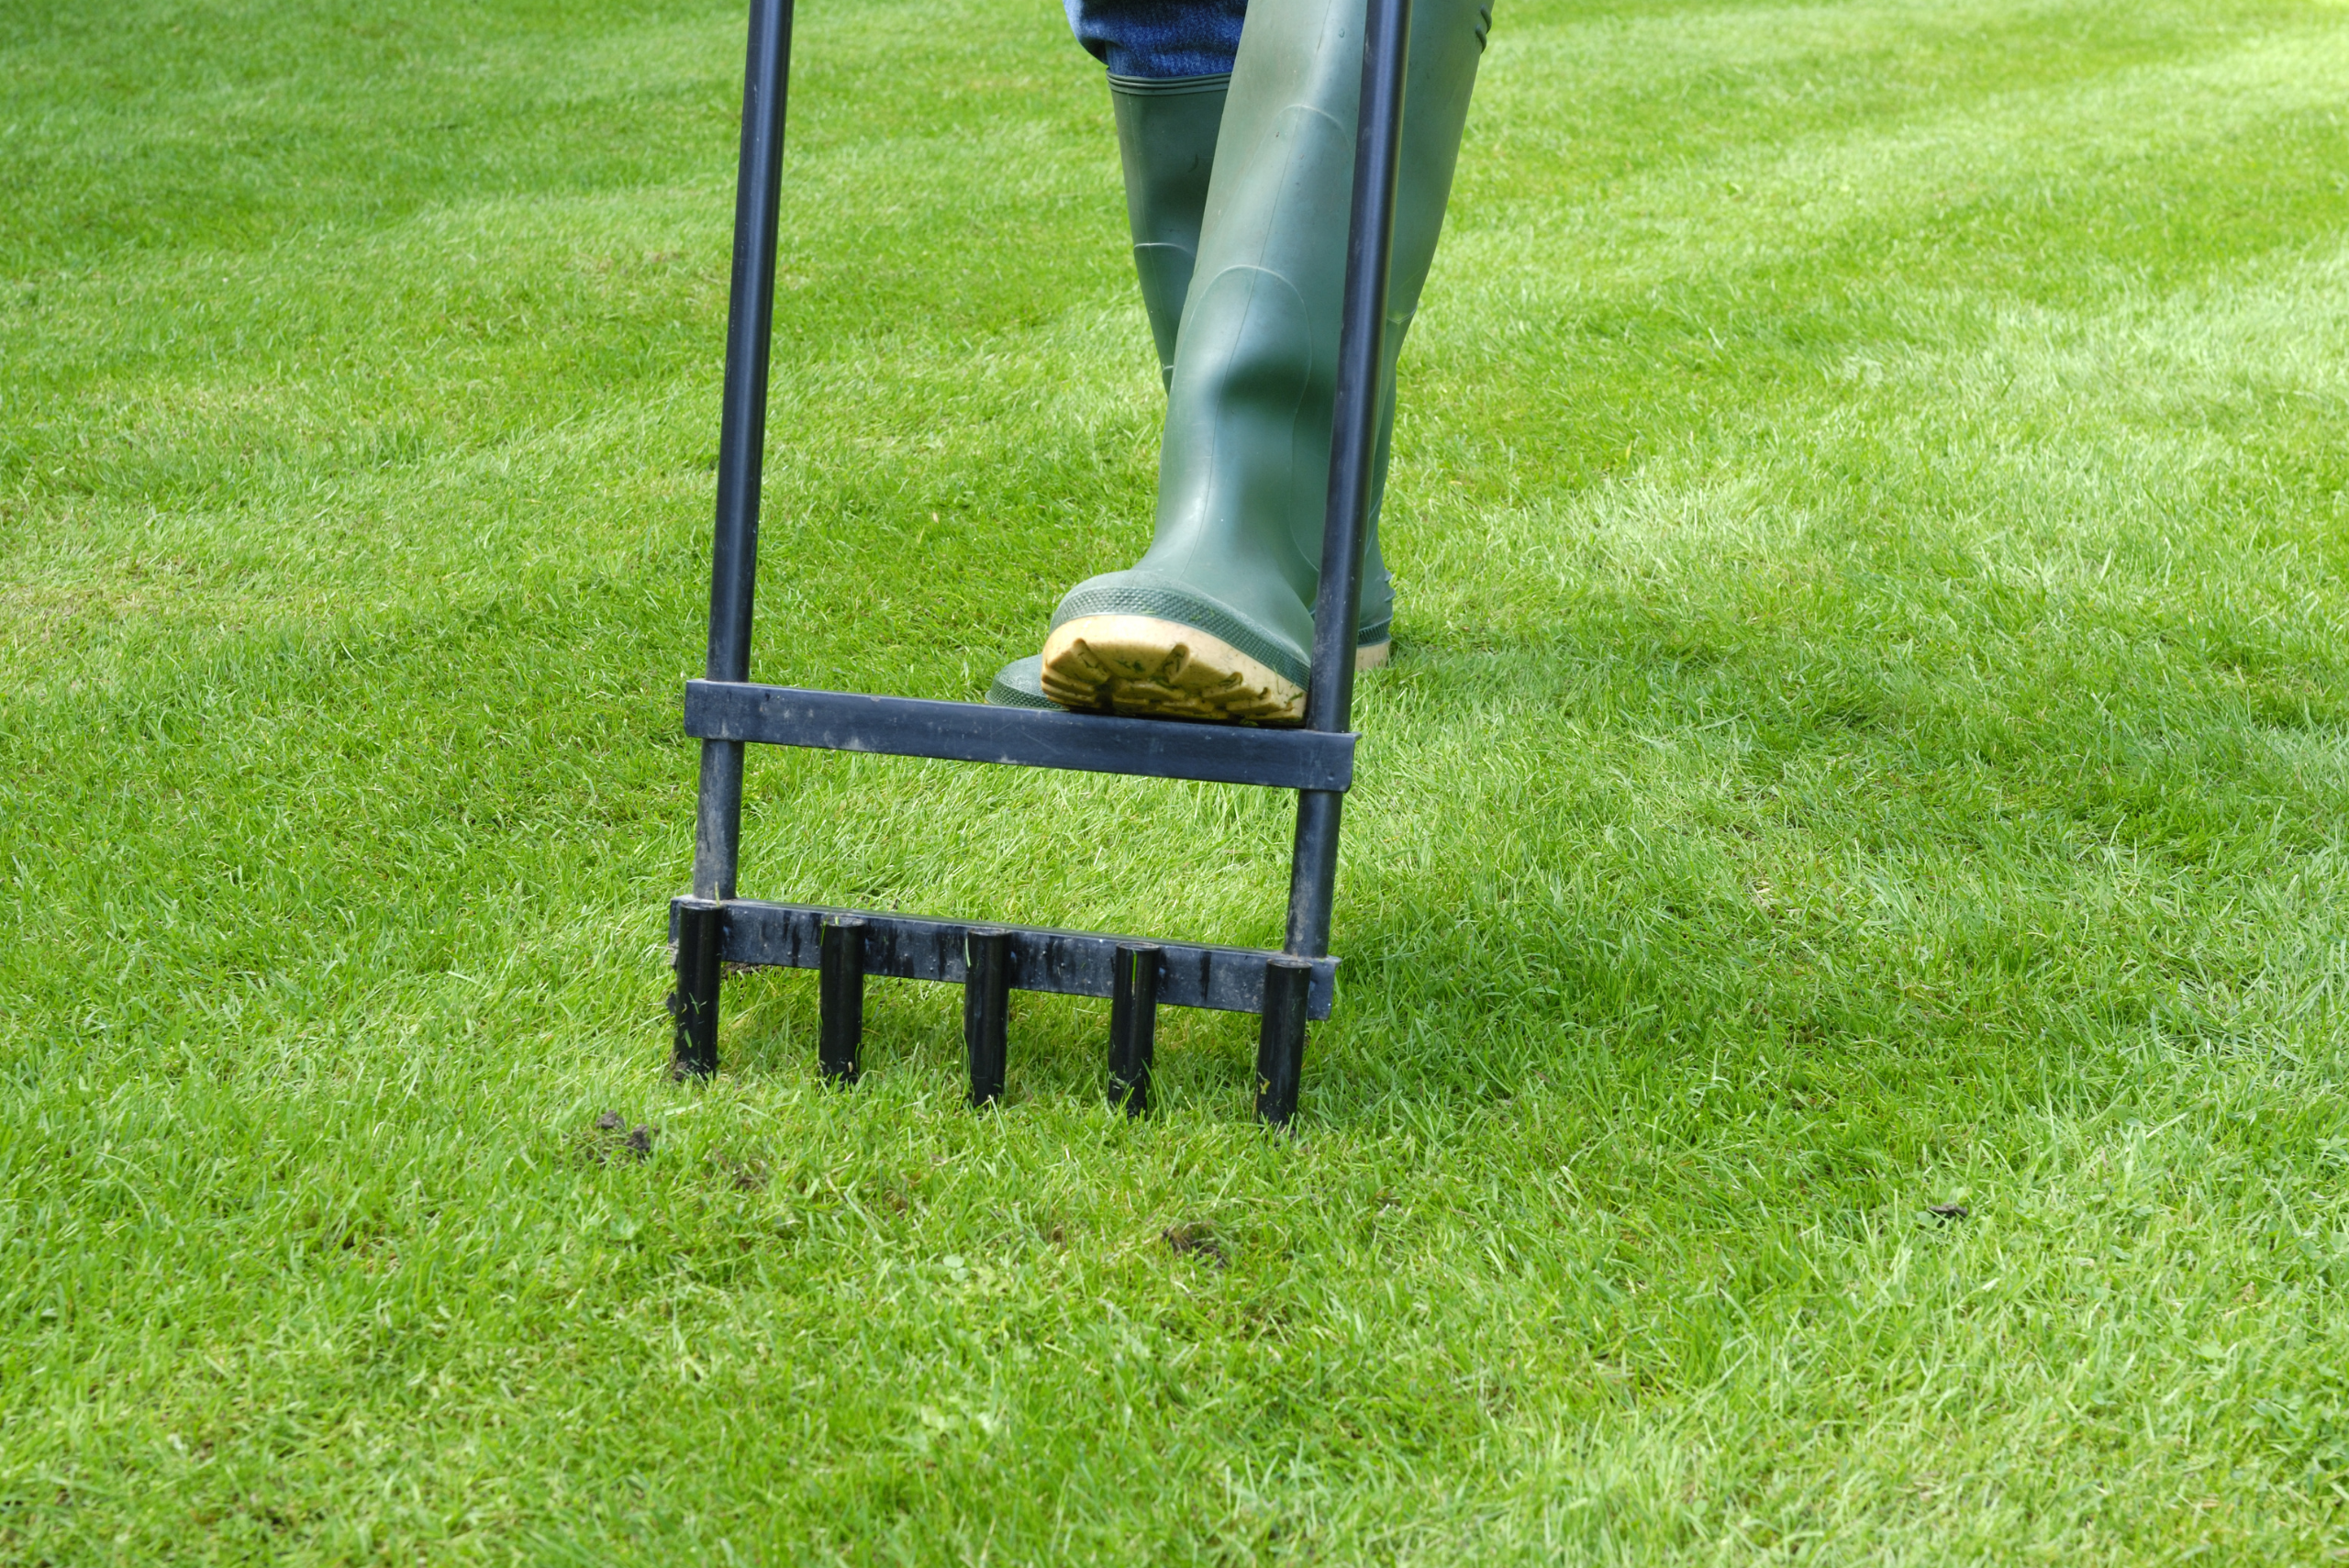 A person's leg pressing down lawn spike for aeration.